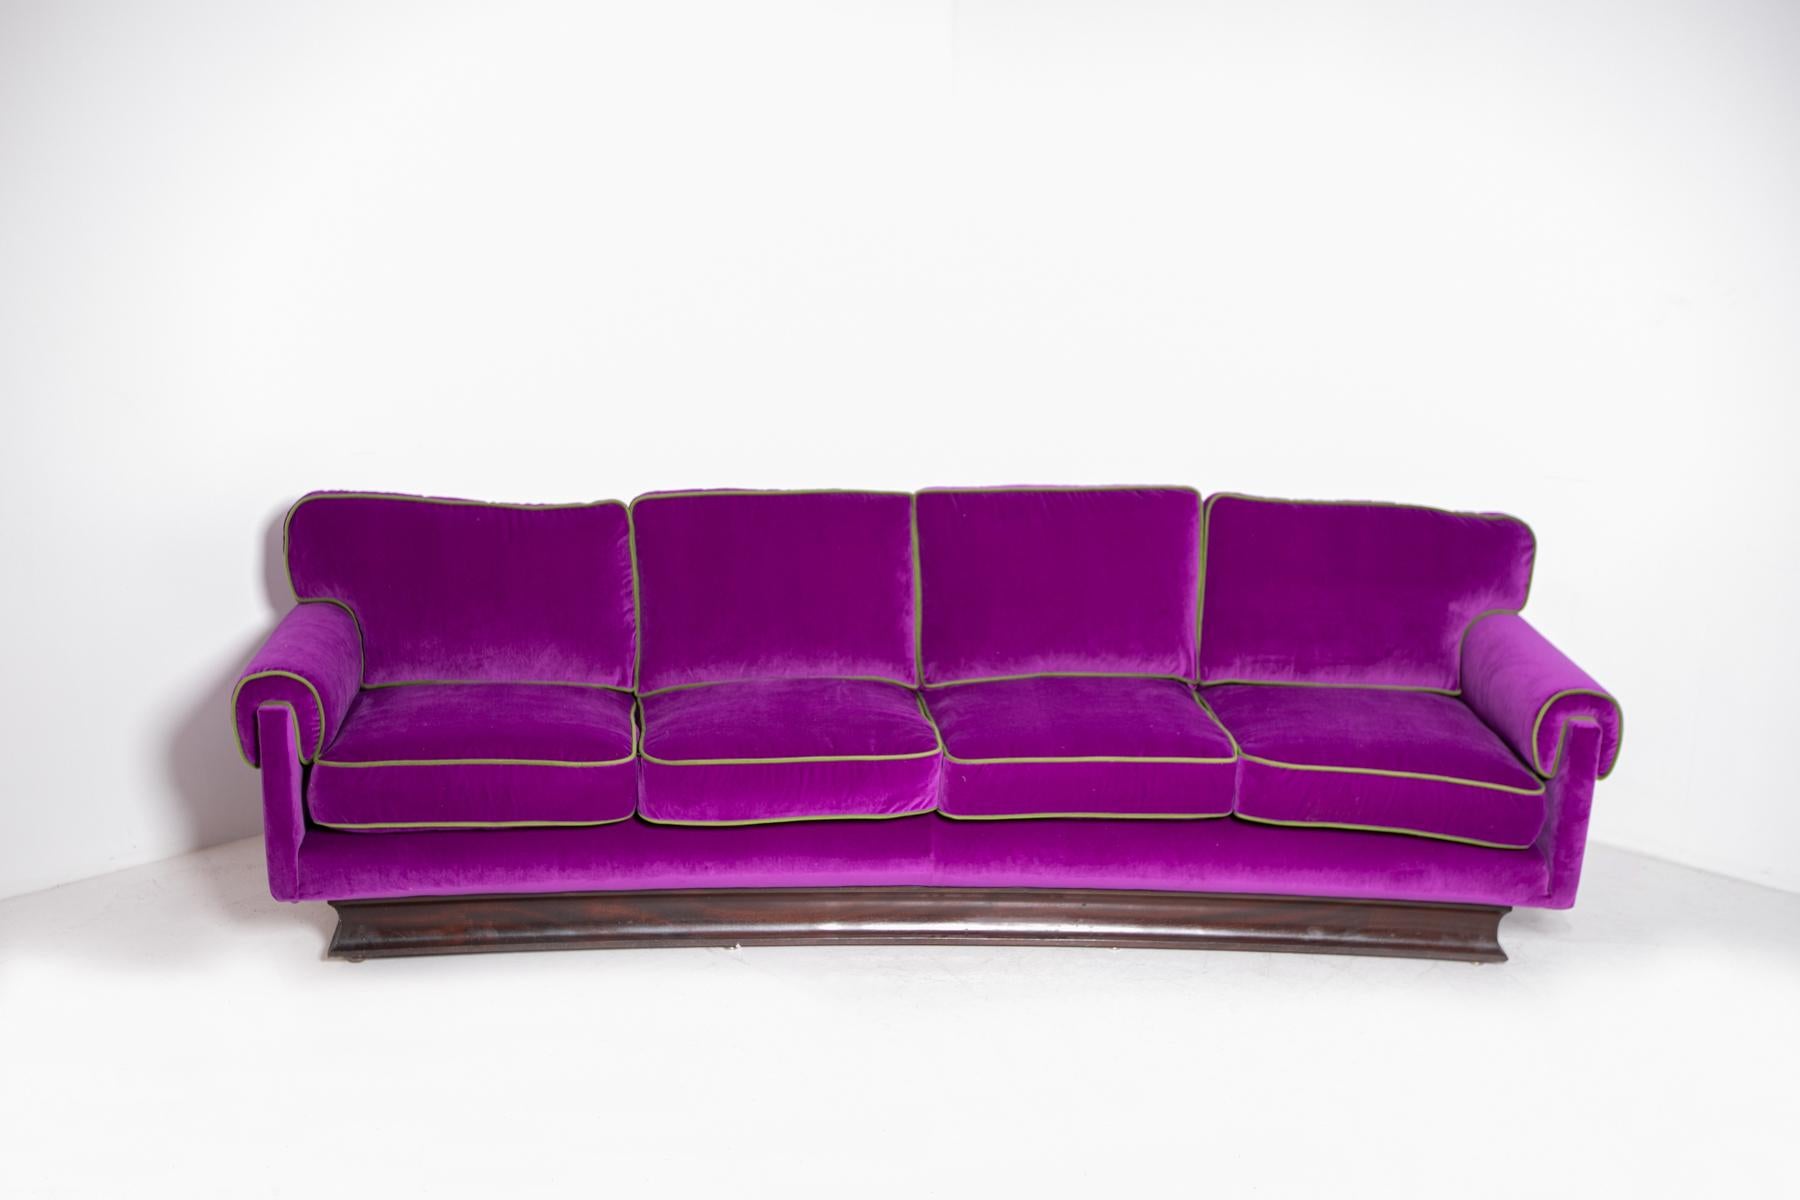 Fantastic and eccentric four seater sofa from the 1950s by Pierluigi Colli Model Claudia.
The sofa is a four seater and has been reupholstered in an elegant and sophisticated purple velvet. Note its edges covered in a bright green velvet